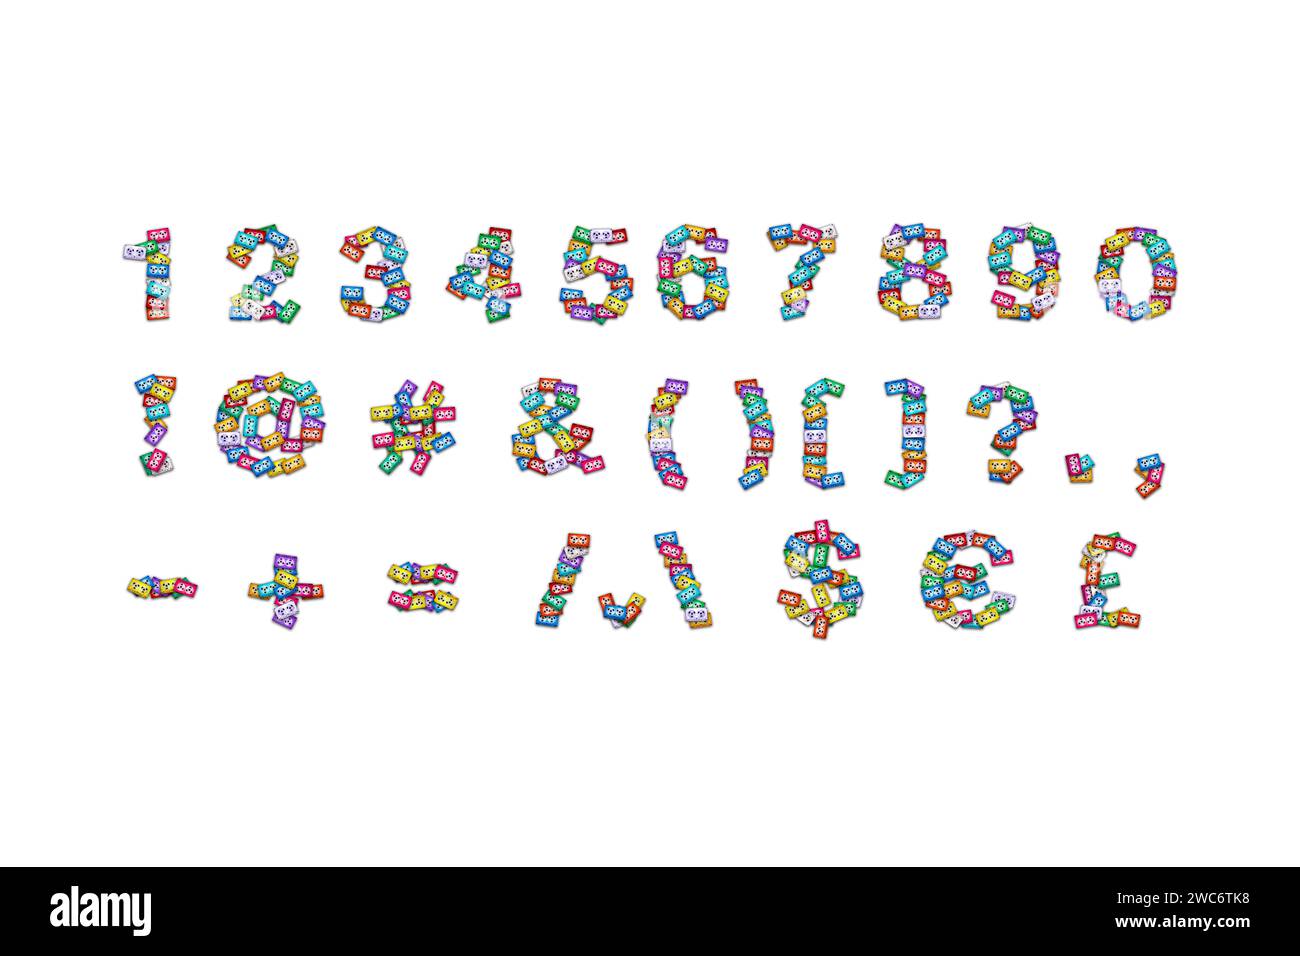 Top view of the numbers and symbols alphabet made of colorful retro audio cassettes scattered on a white background. The concept of music theme gift c Stock Photo